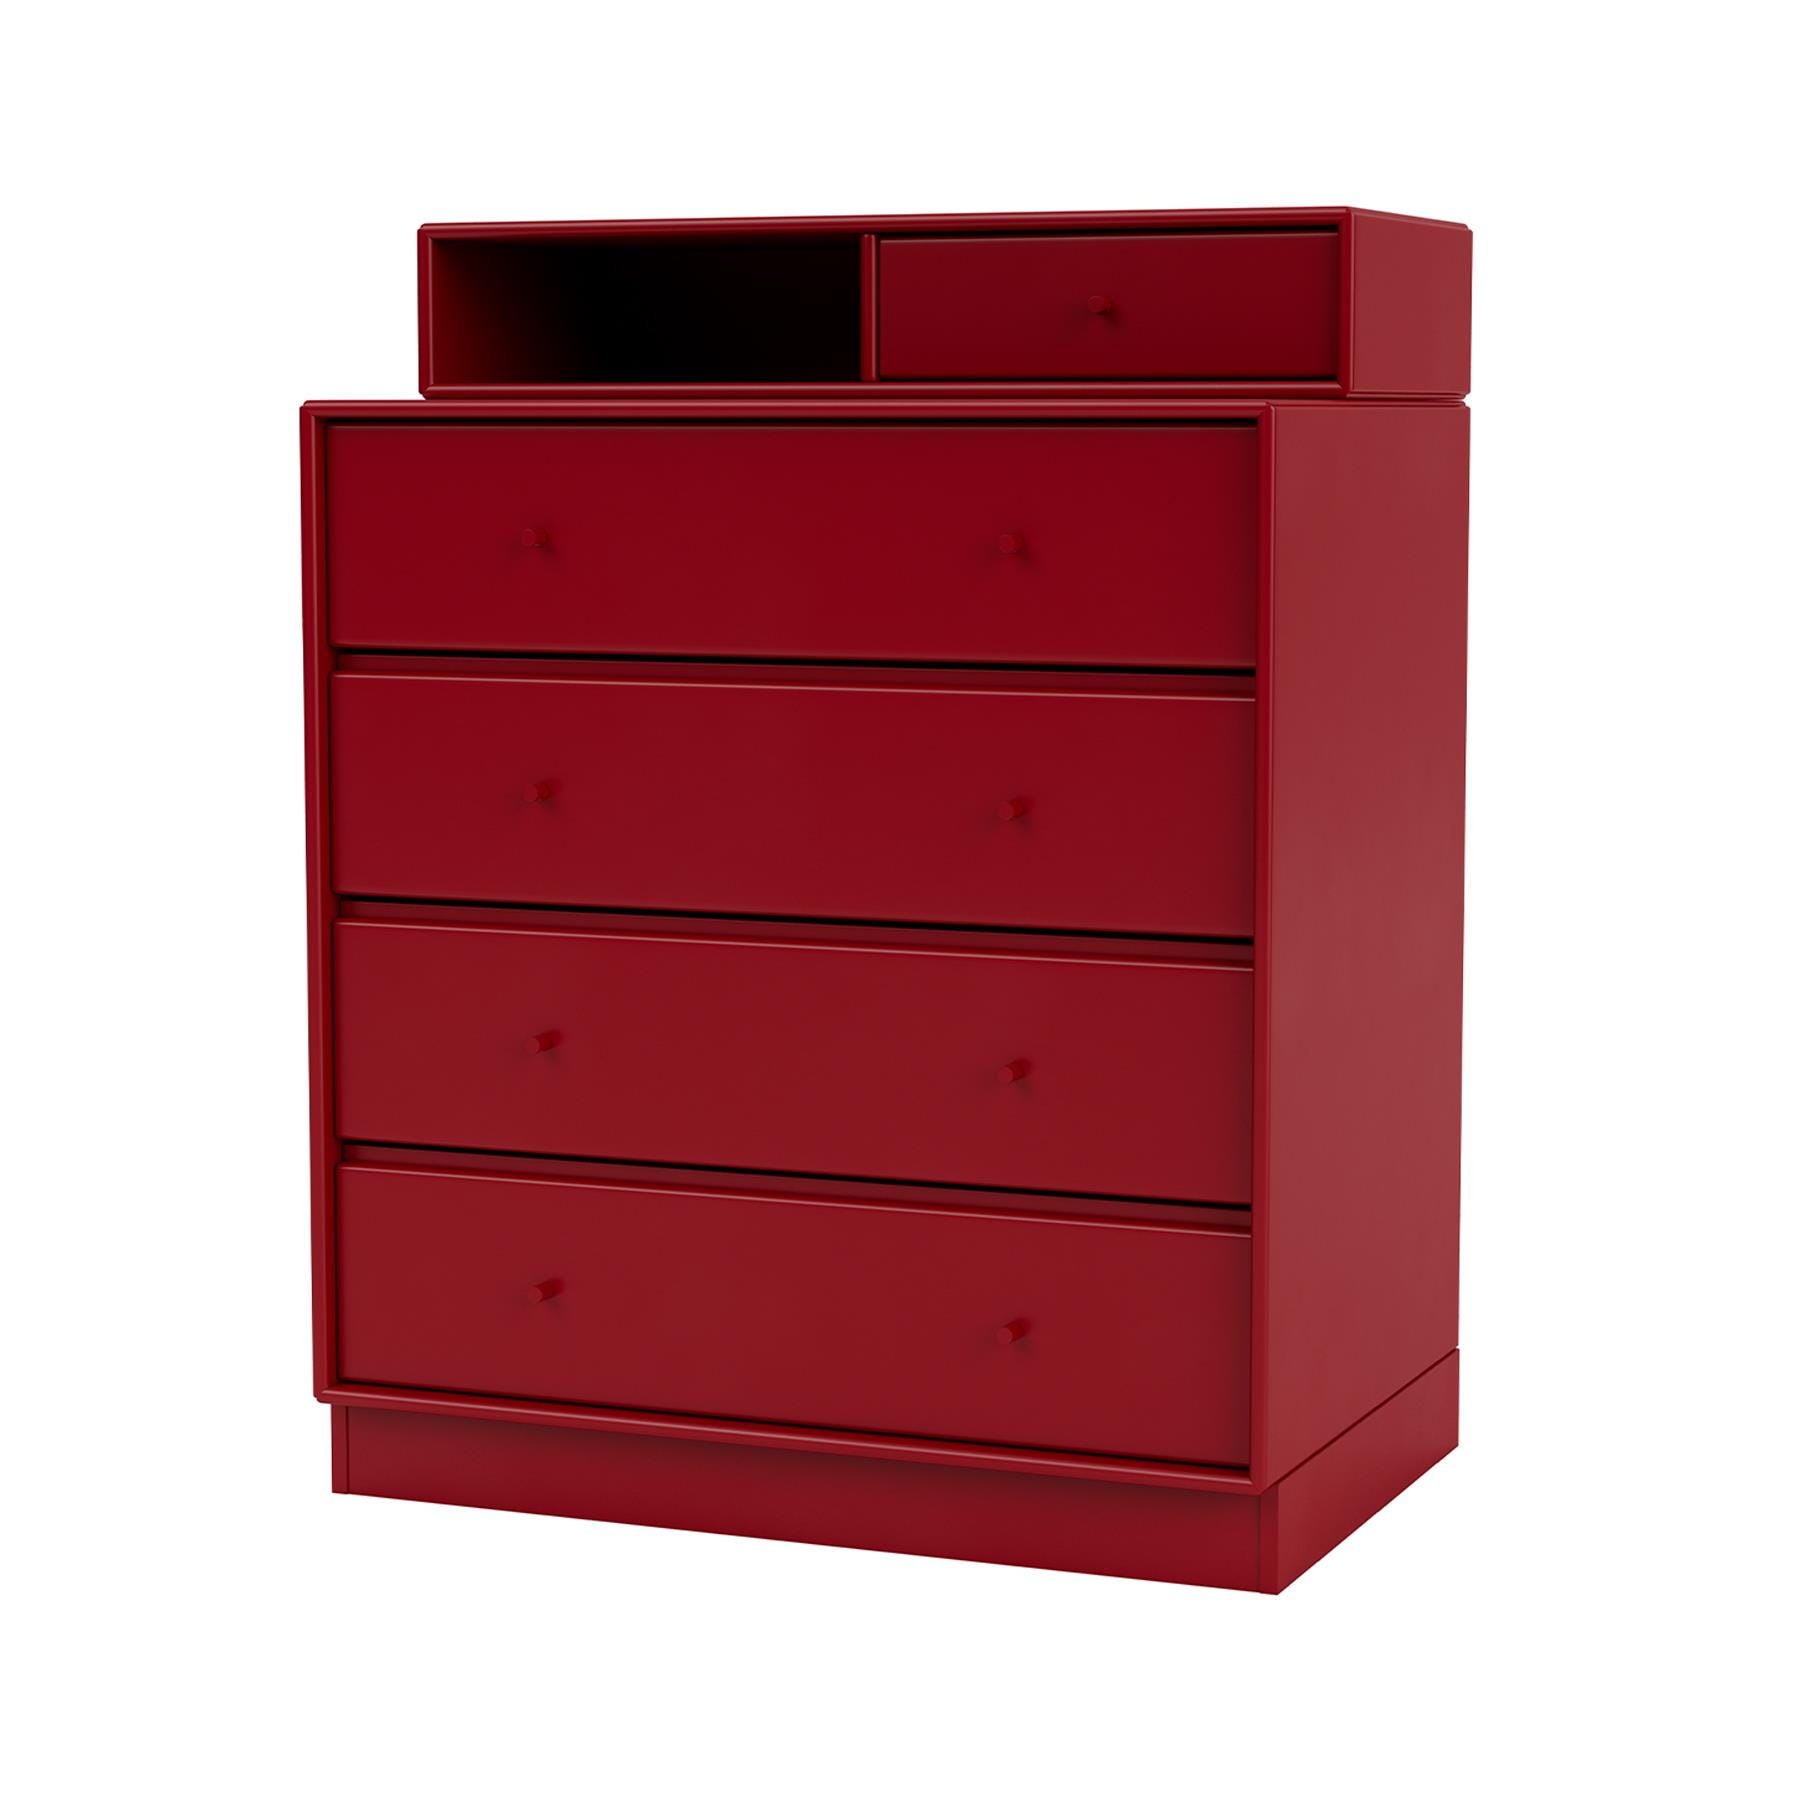 Montana Keep Chest Of Drawers Beetroot Plinth Purple Designer Furniture From Holloways Of Ludlow